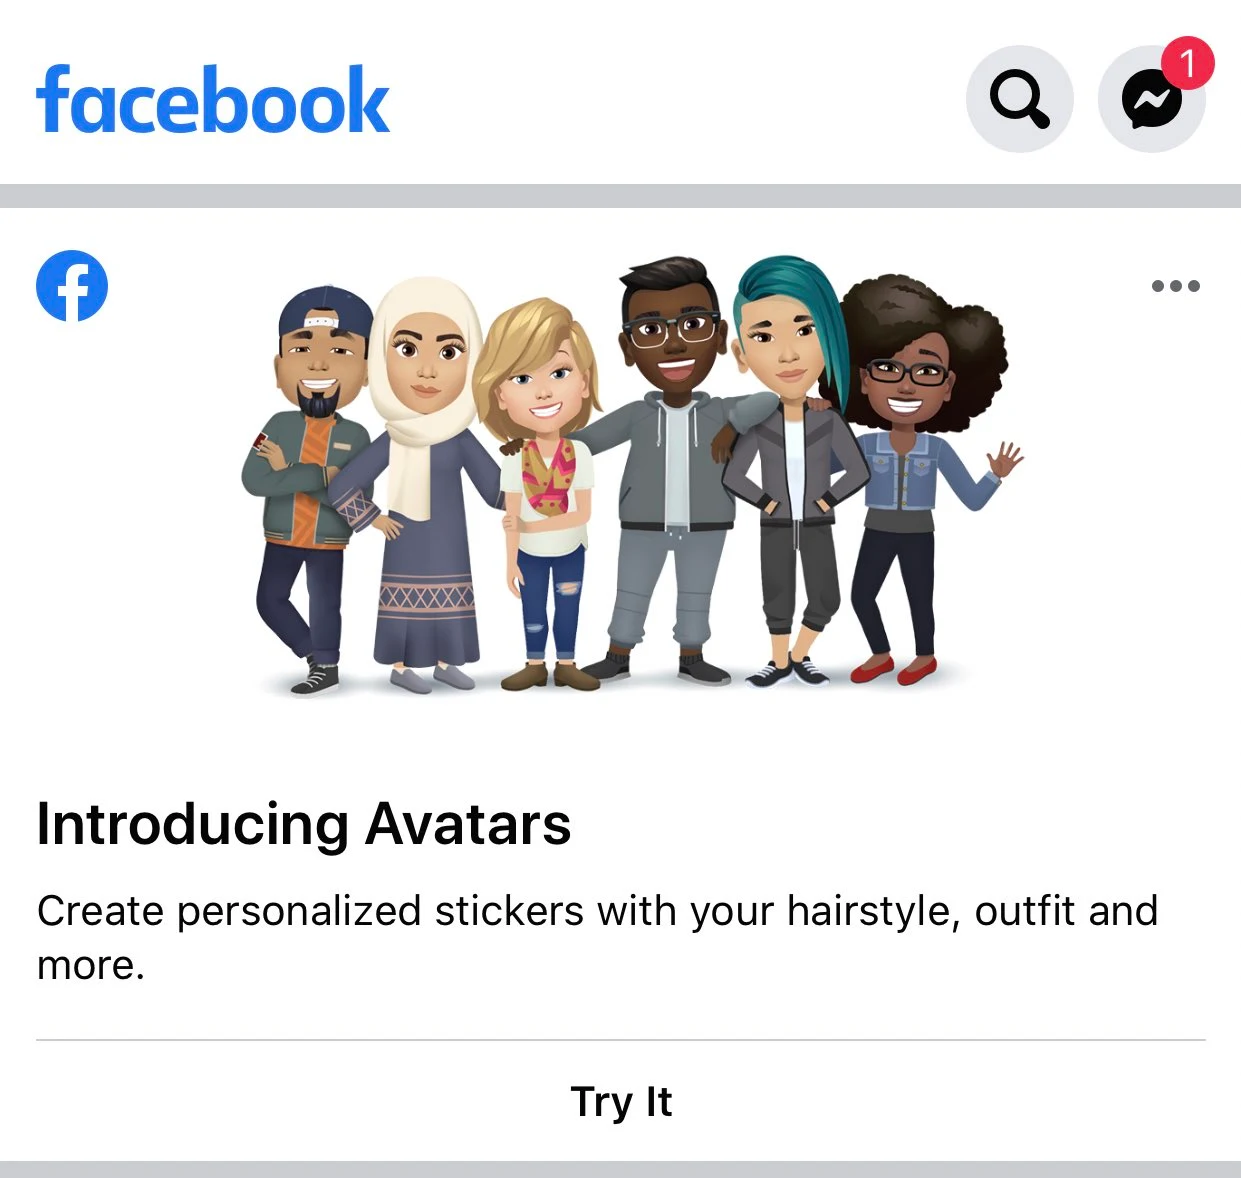 Facebook promoting its new avatars feature in news feed